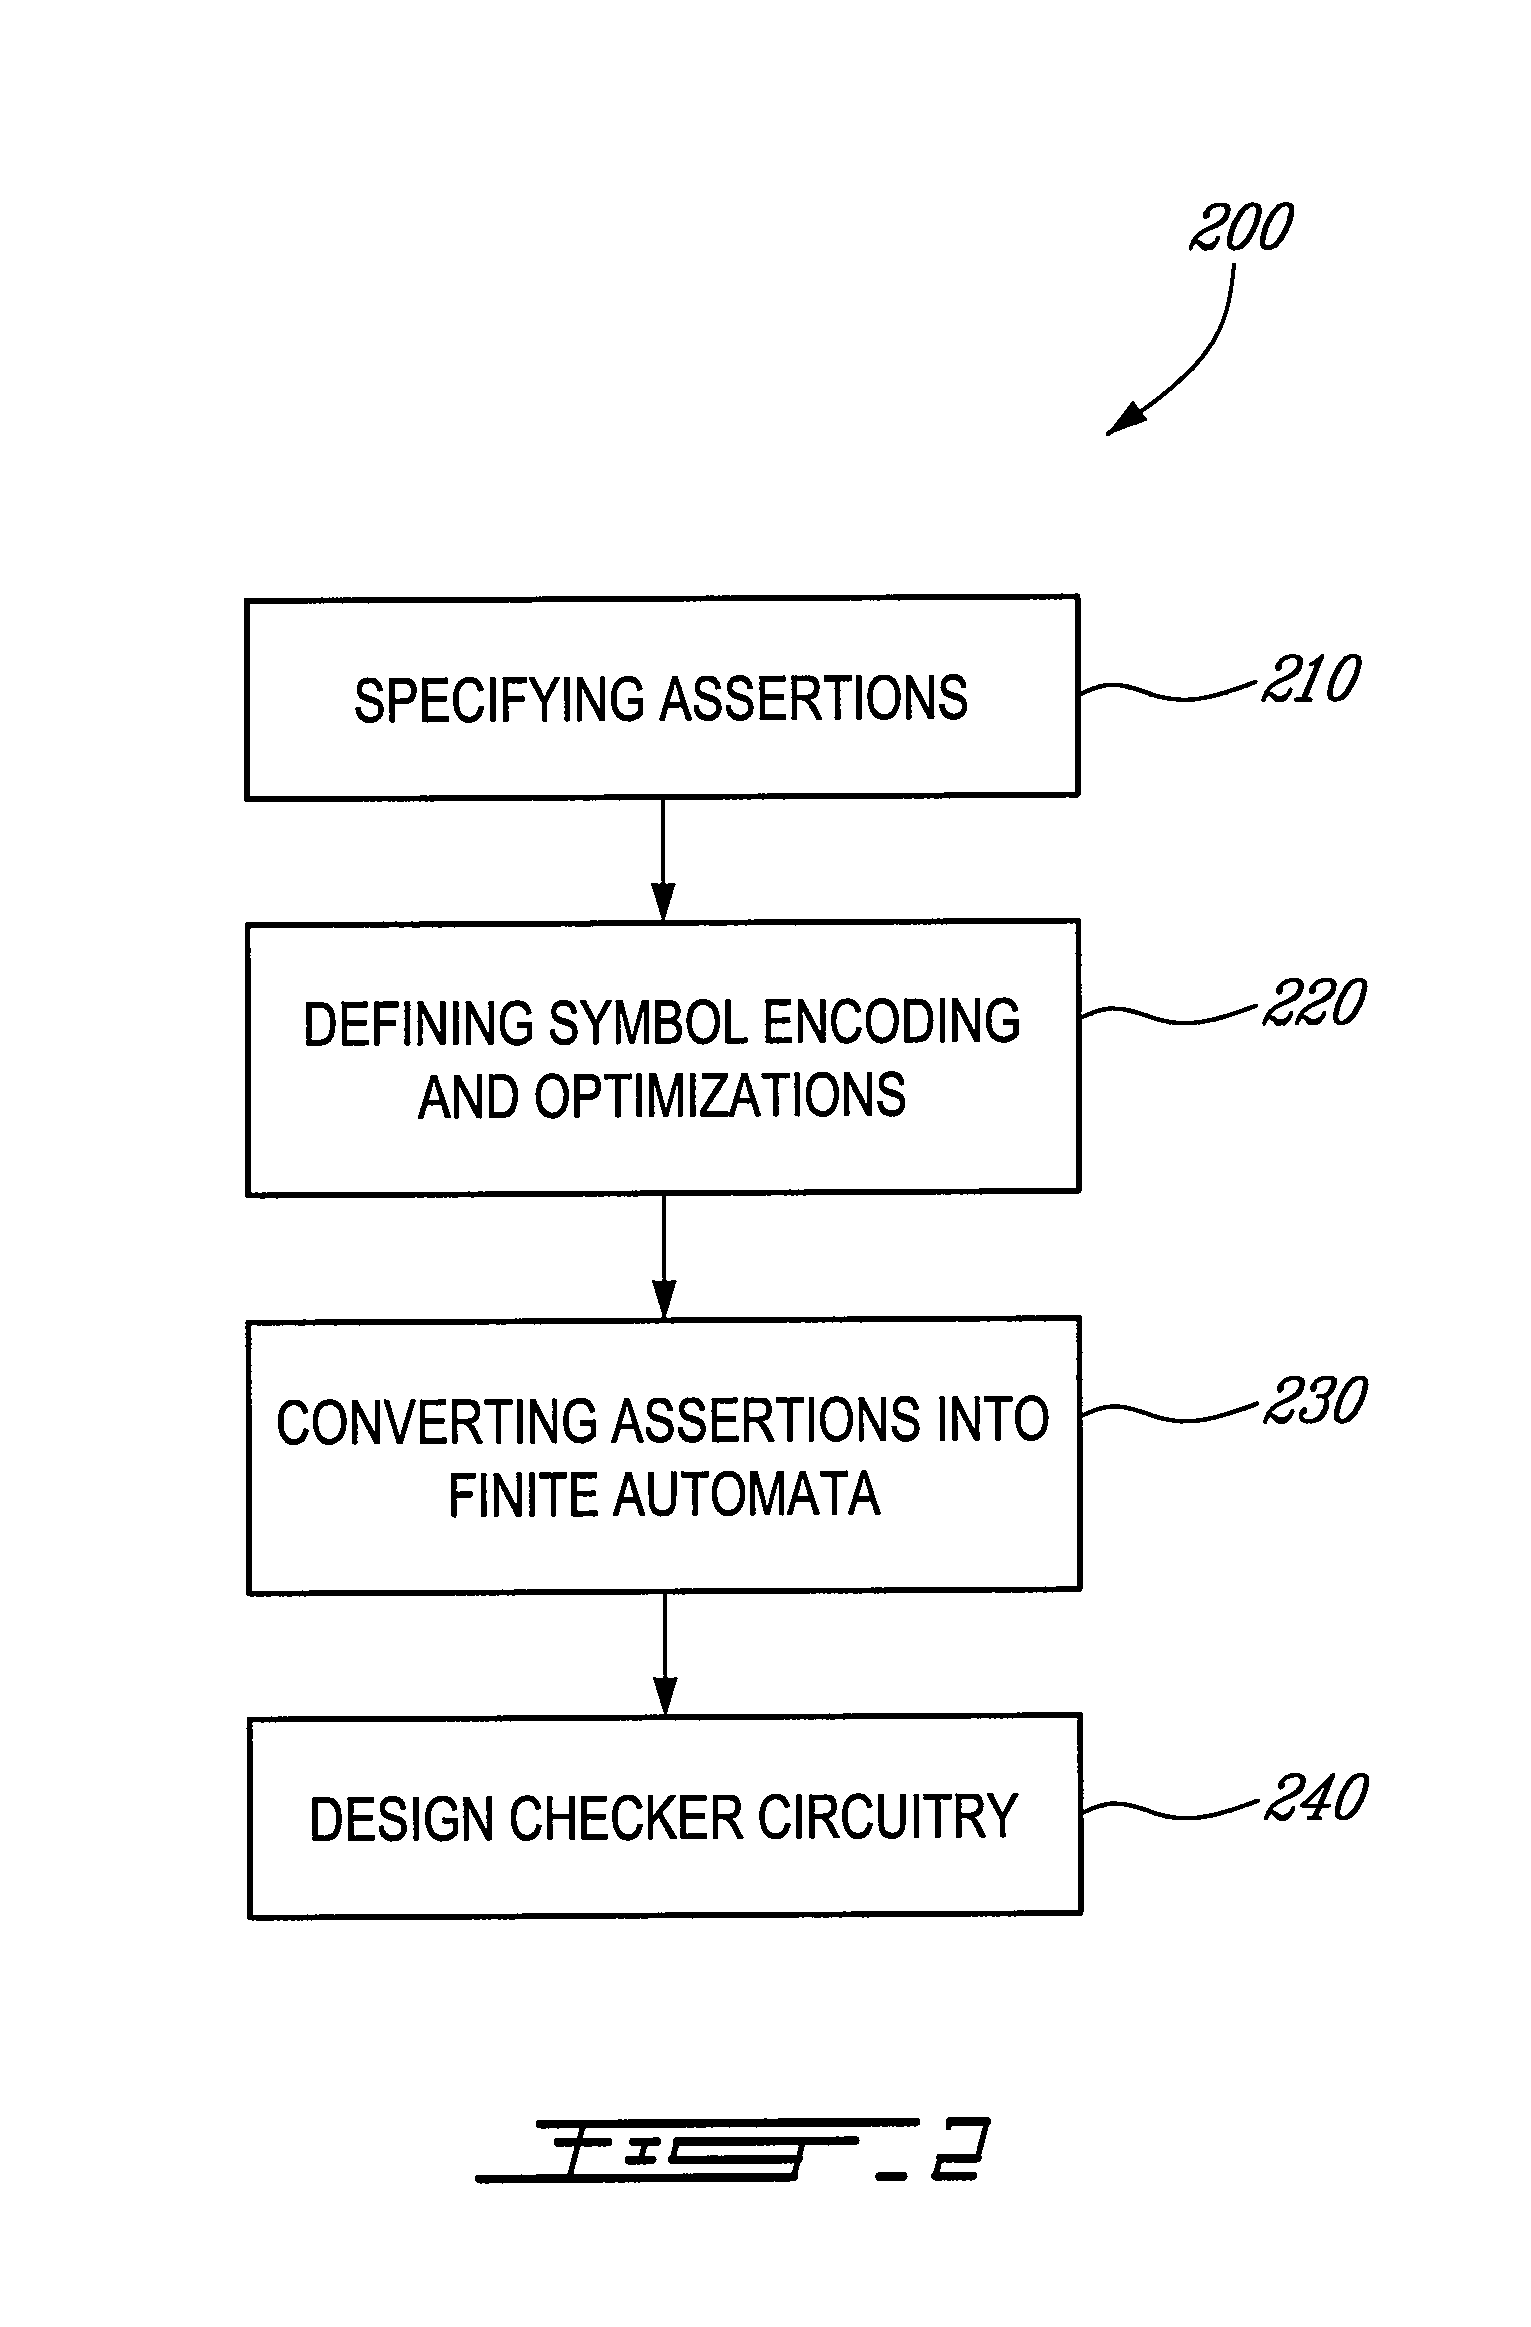 Automata unit, a tool for designing checker circuitry and a method of manufacturing hardware circuitry incorporating checker circuitry